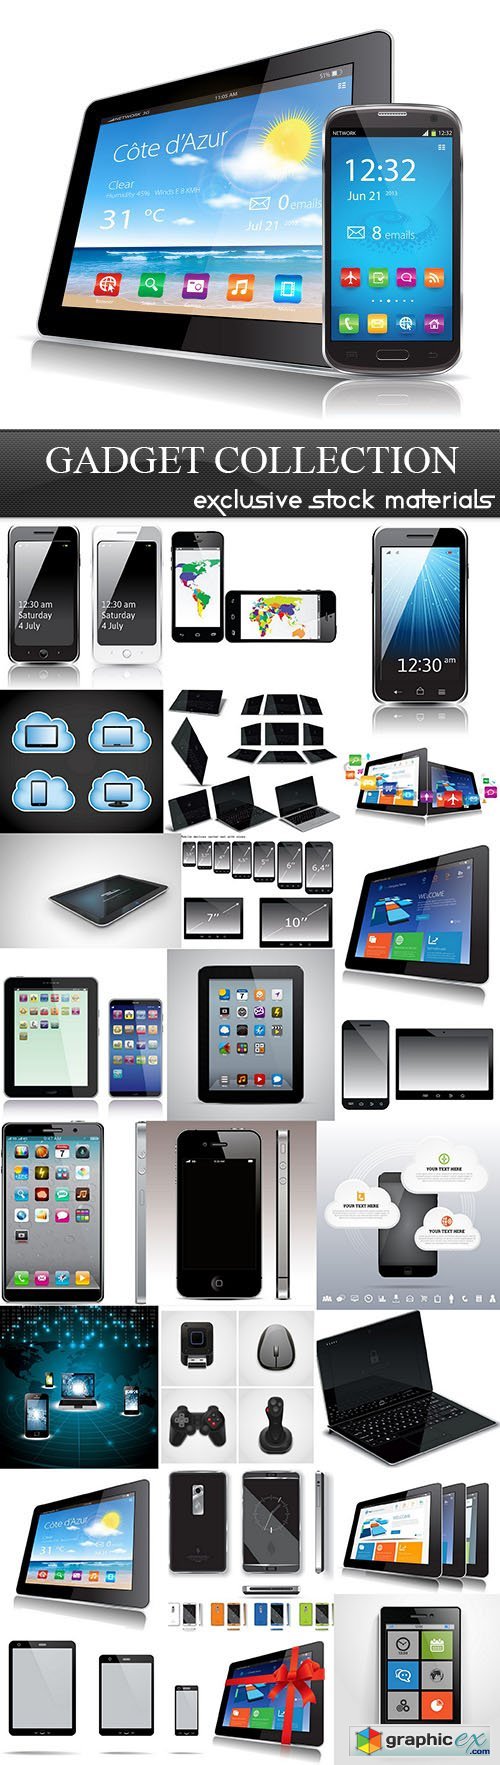 Gadget Collection, 25xEPS